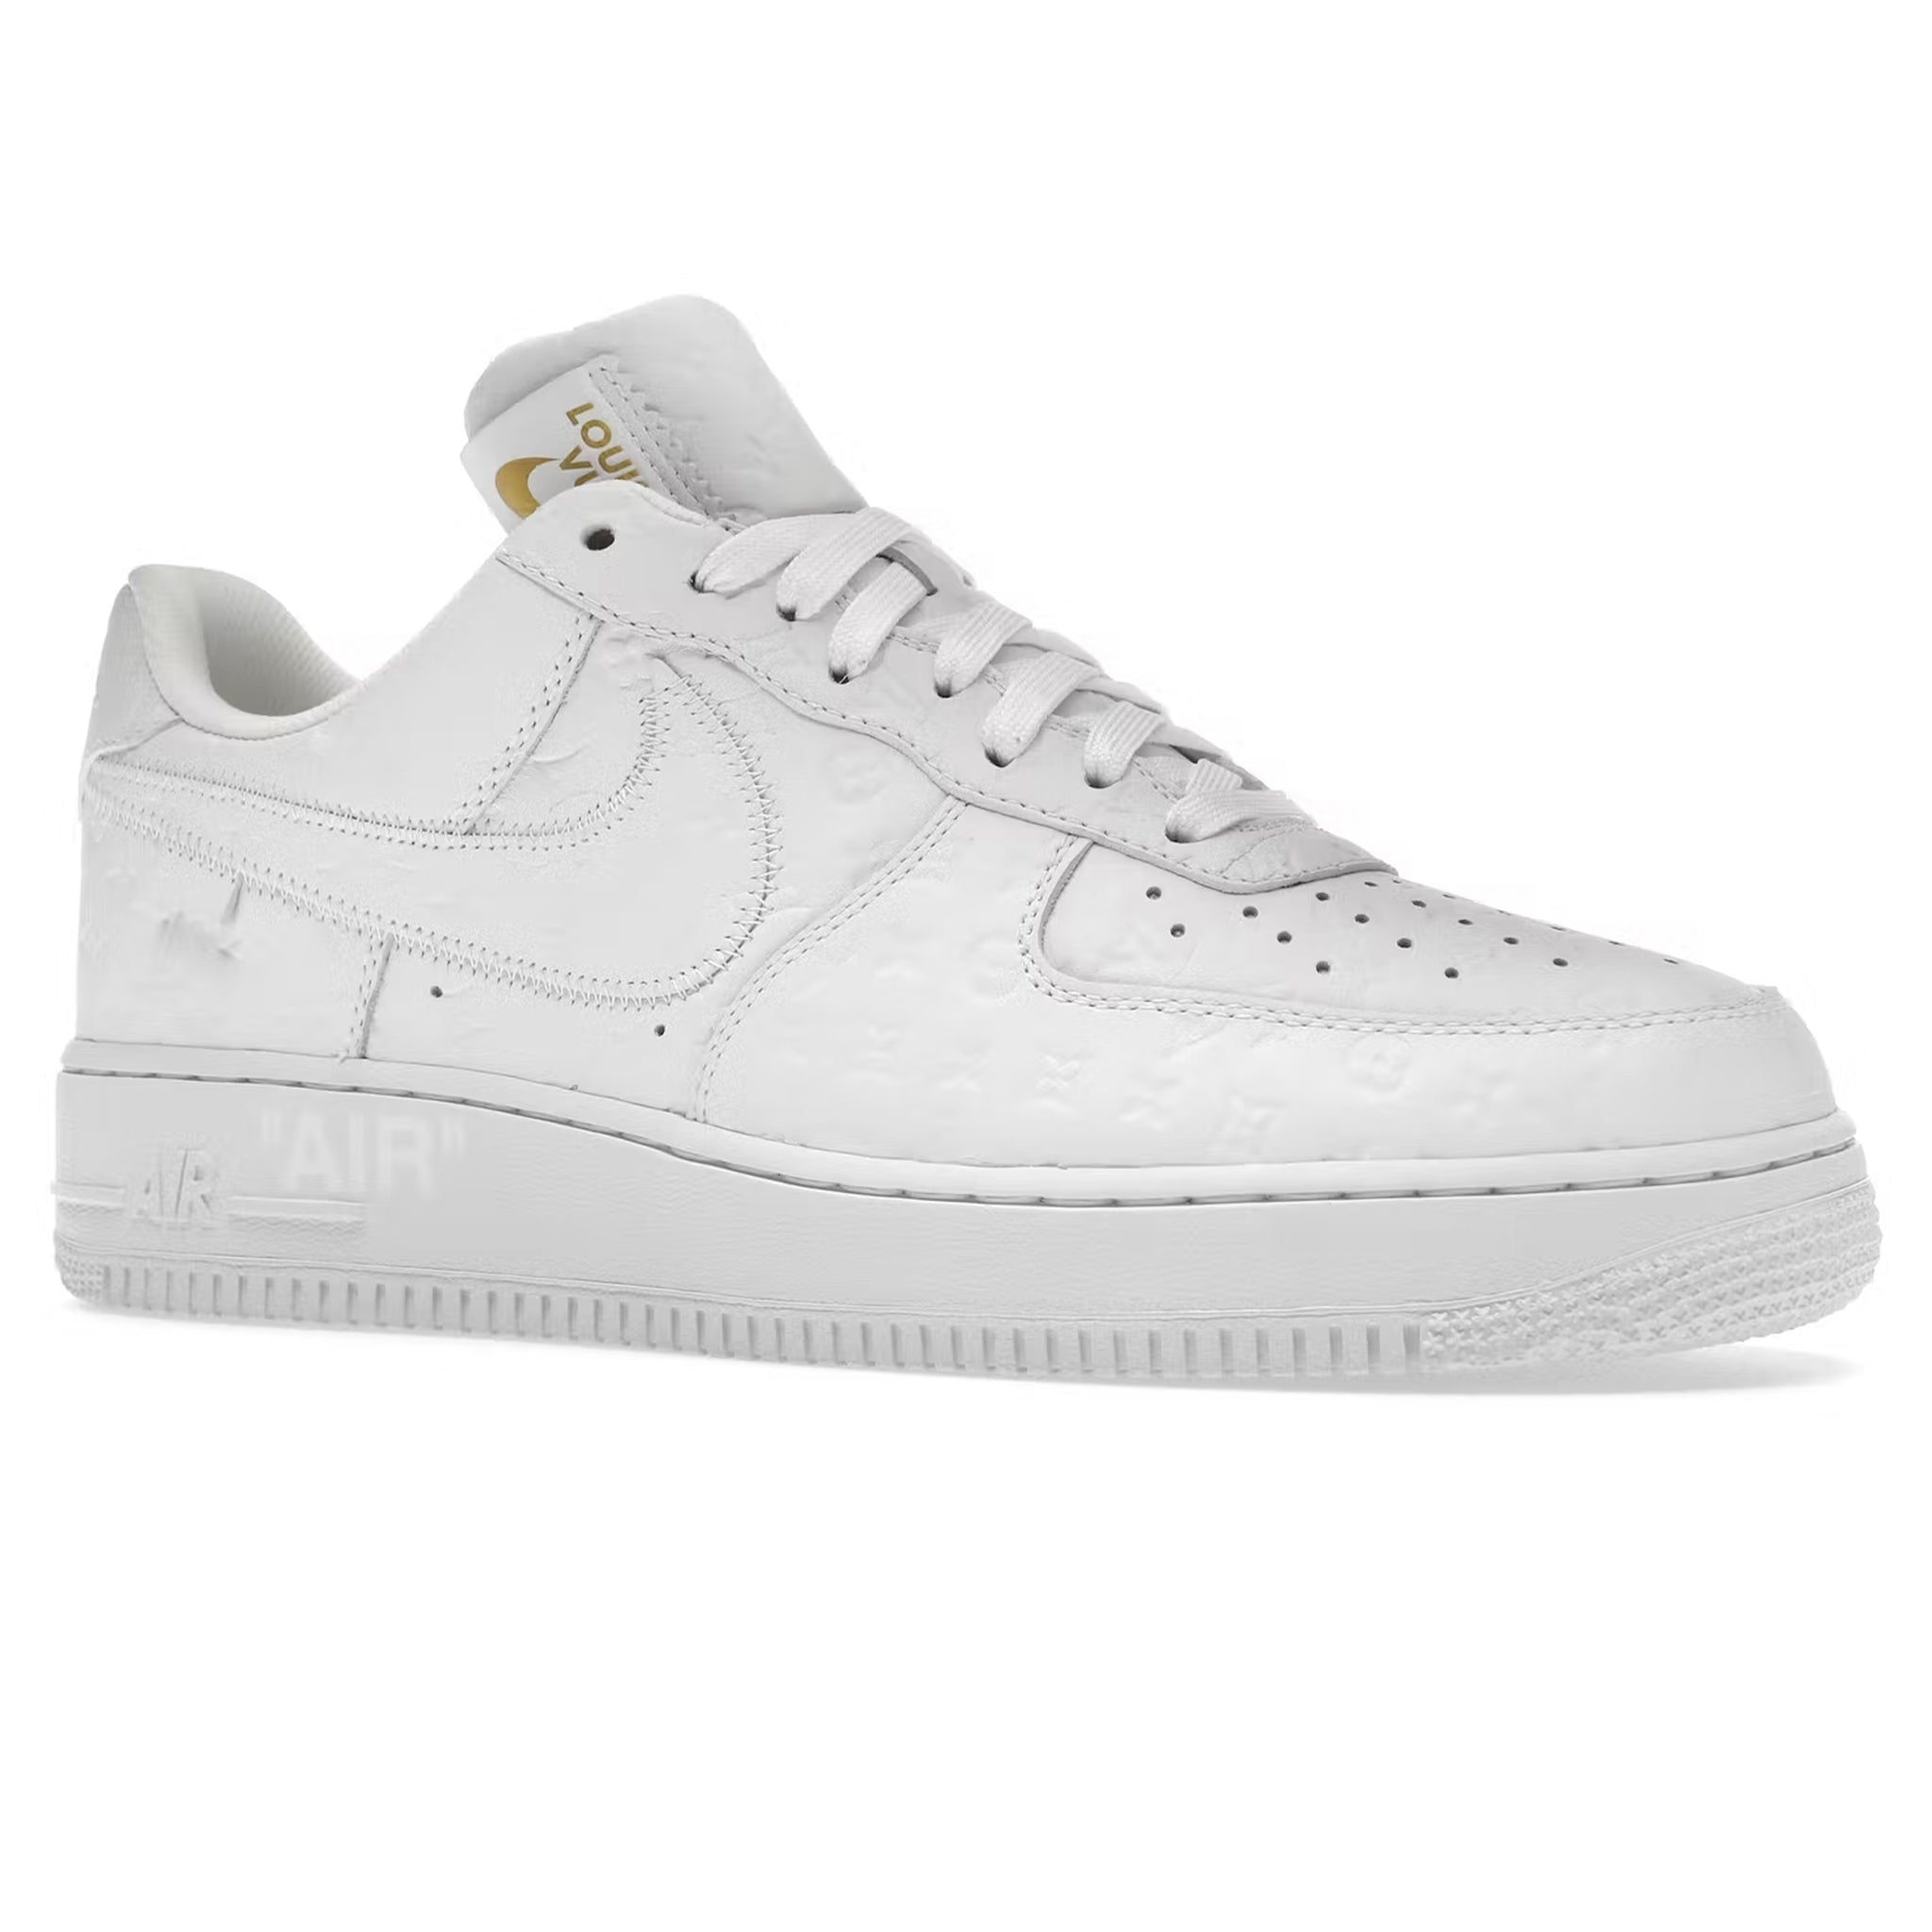 How to Buy the Louis Vuitton x Nike Air Force 1